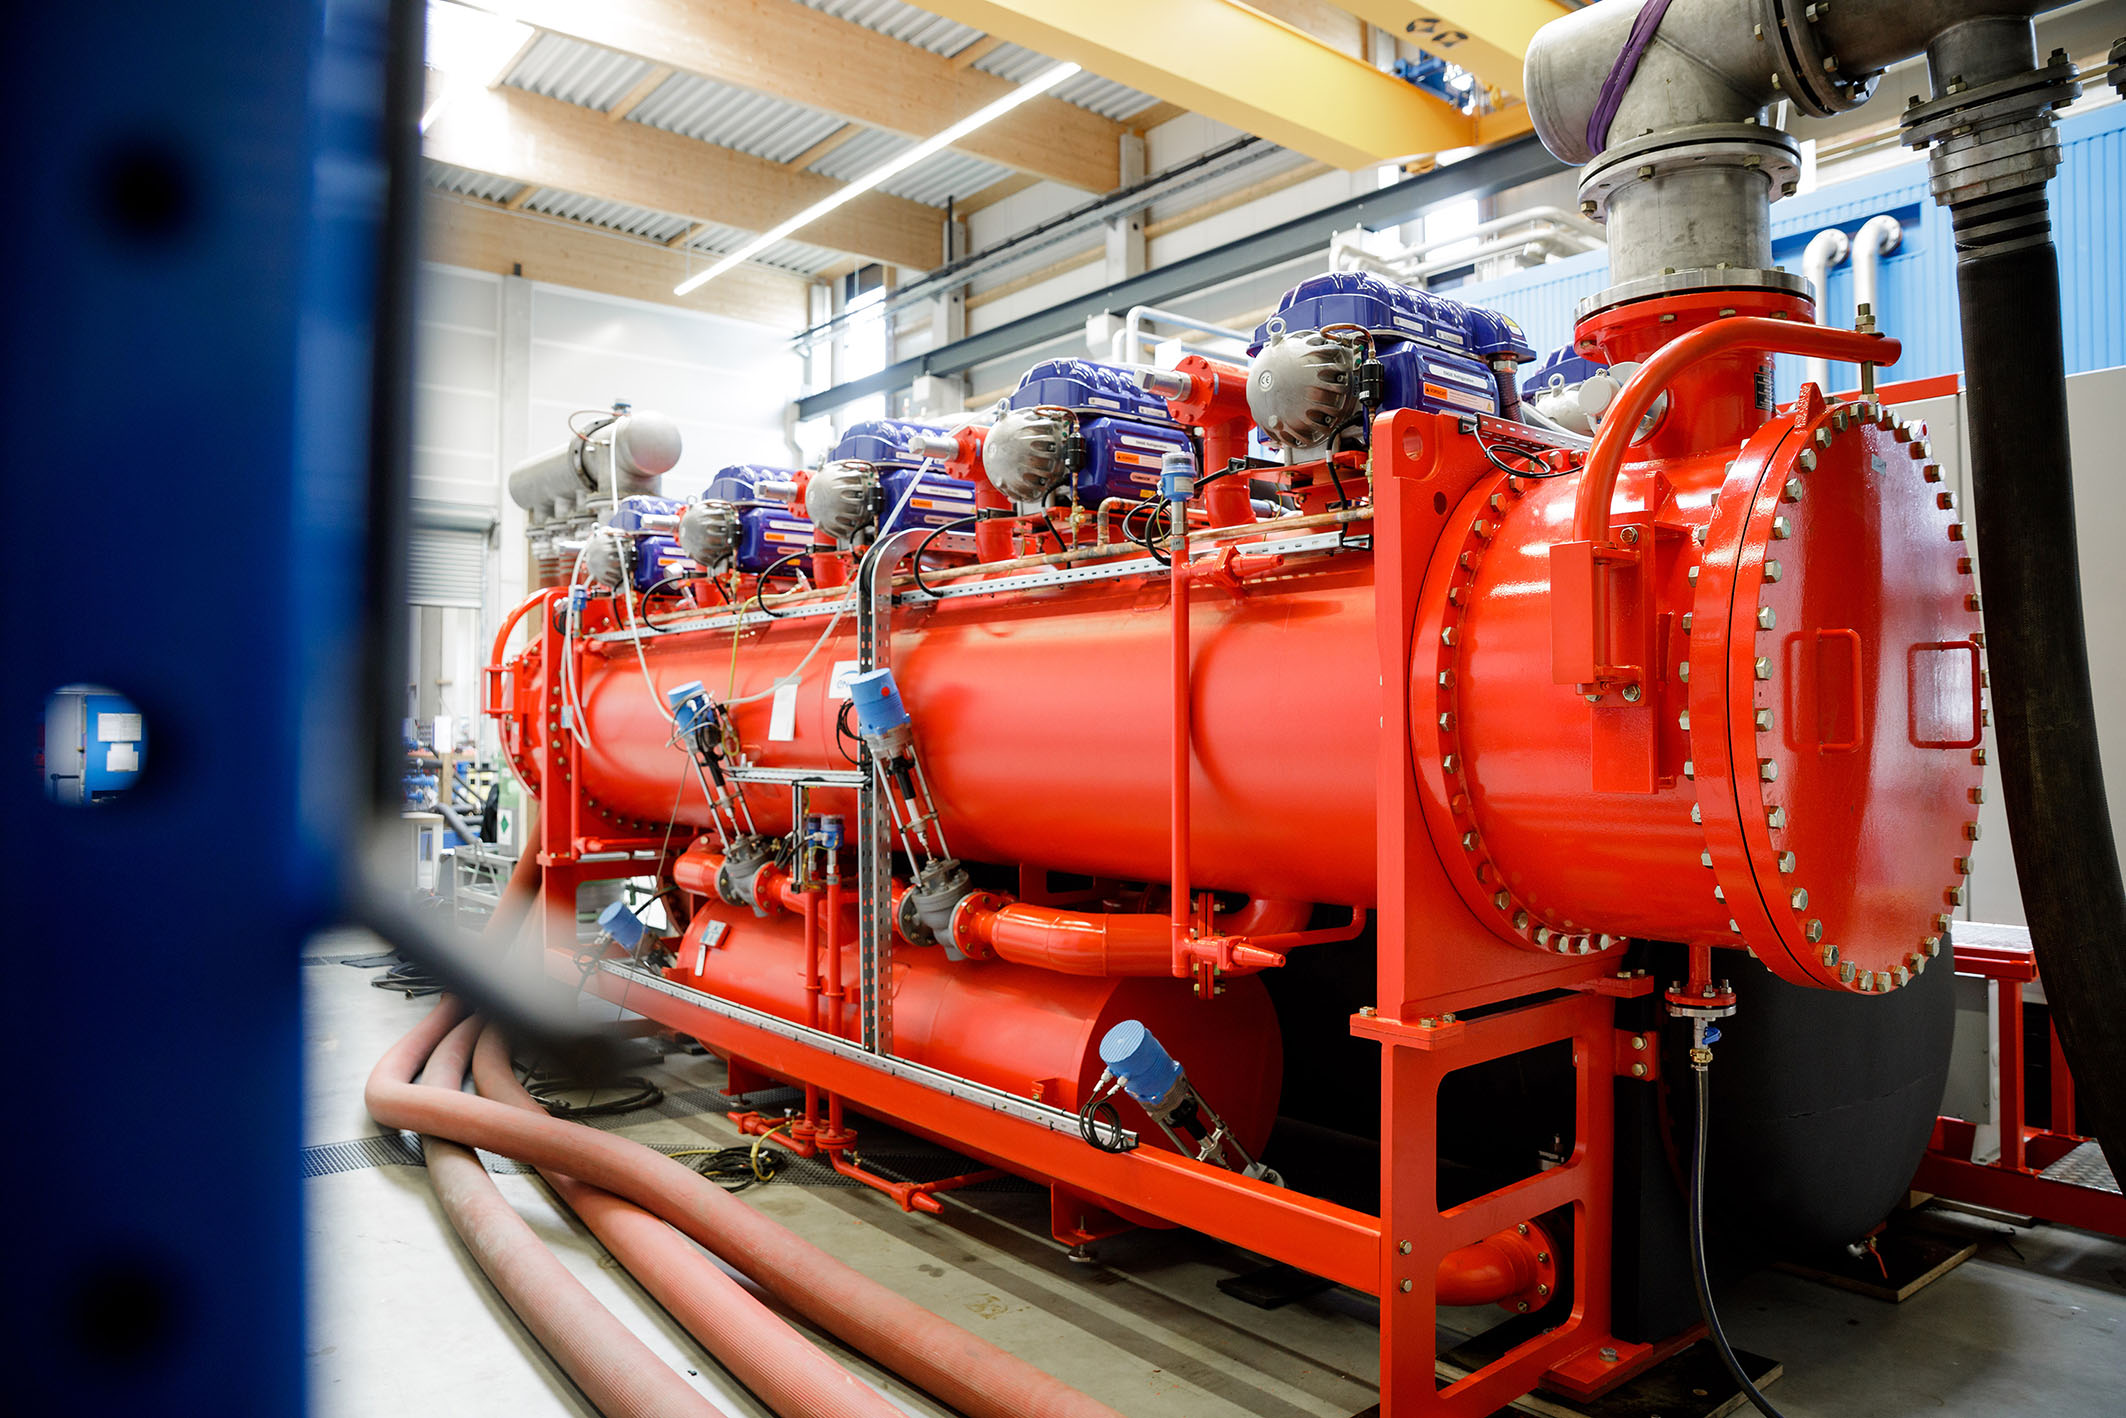 ENGIE Refrigeration bets on sustainable refrigerant